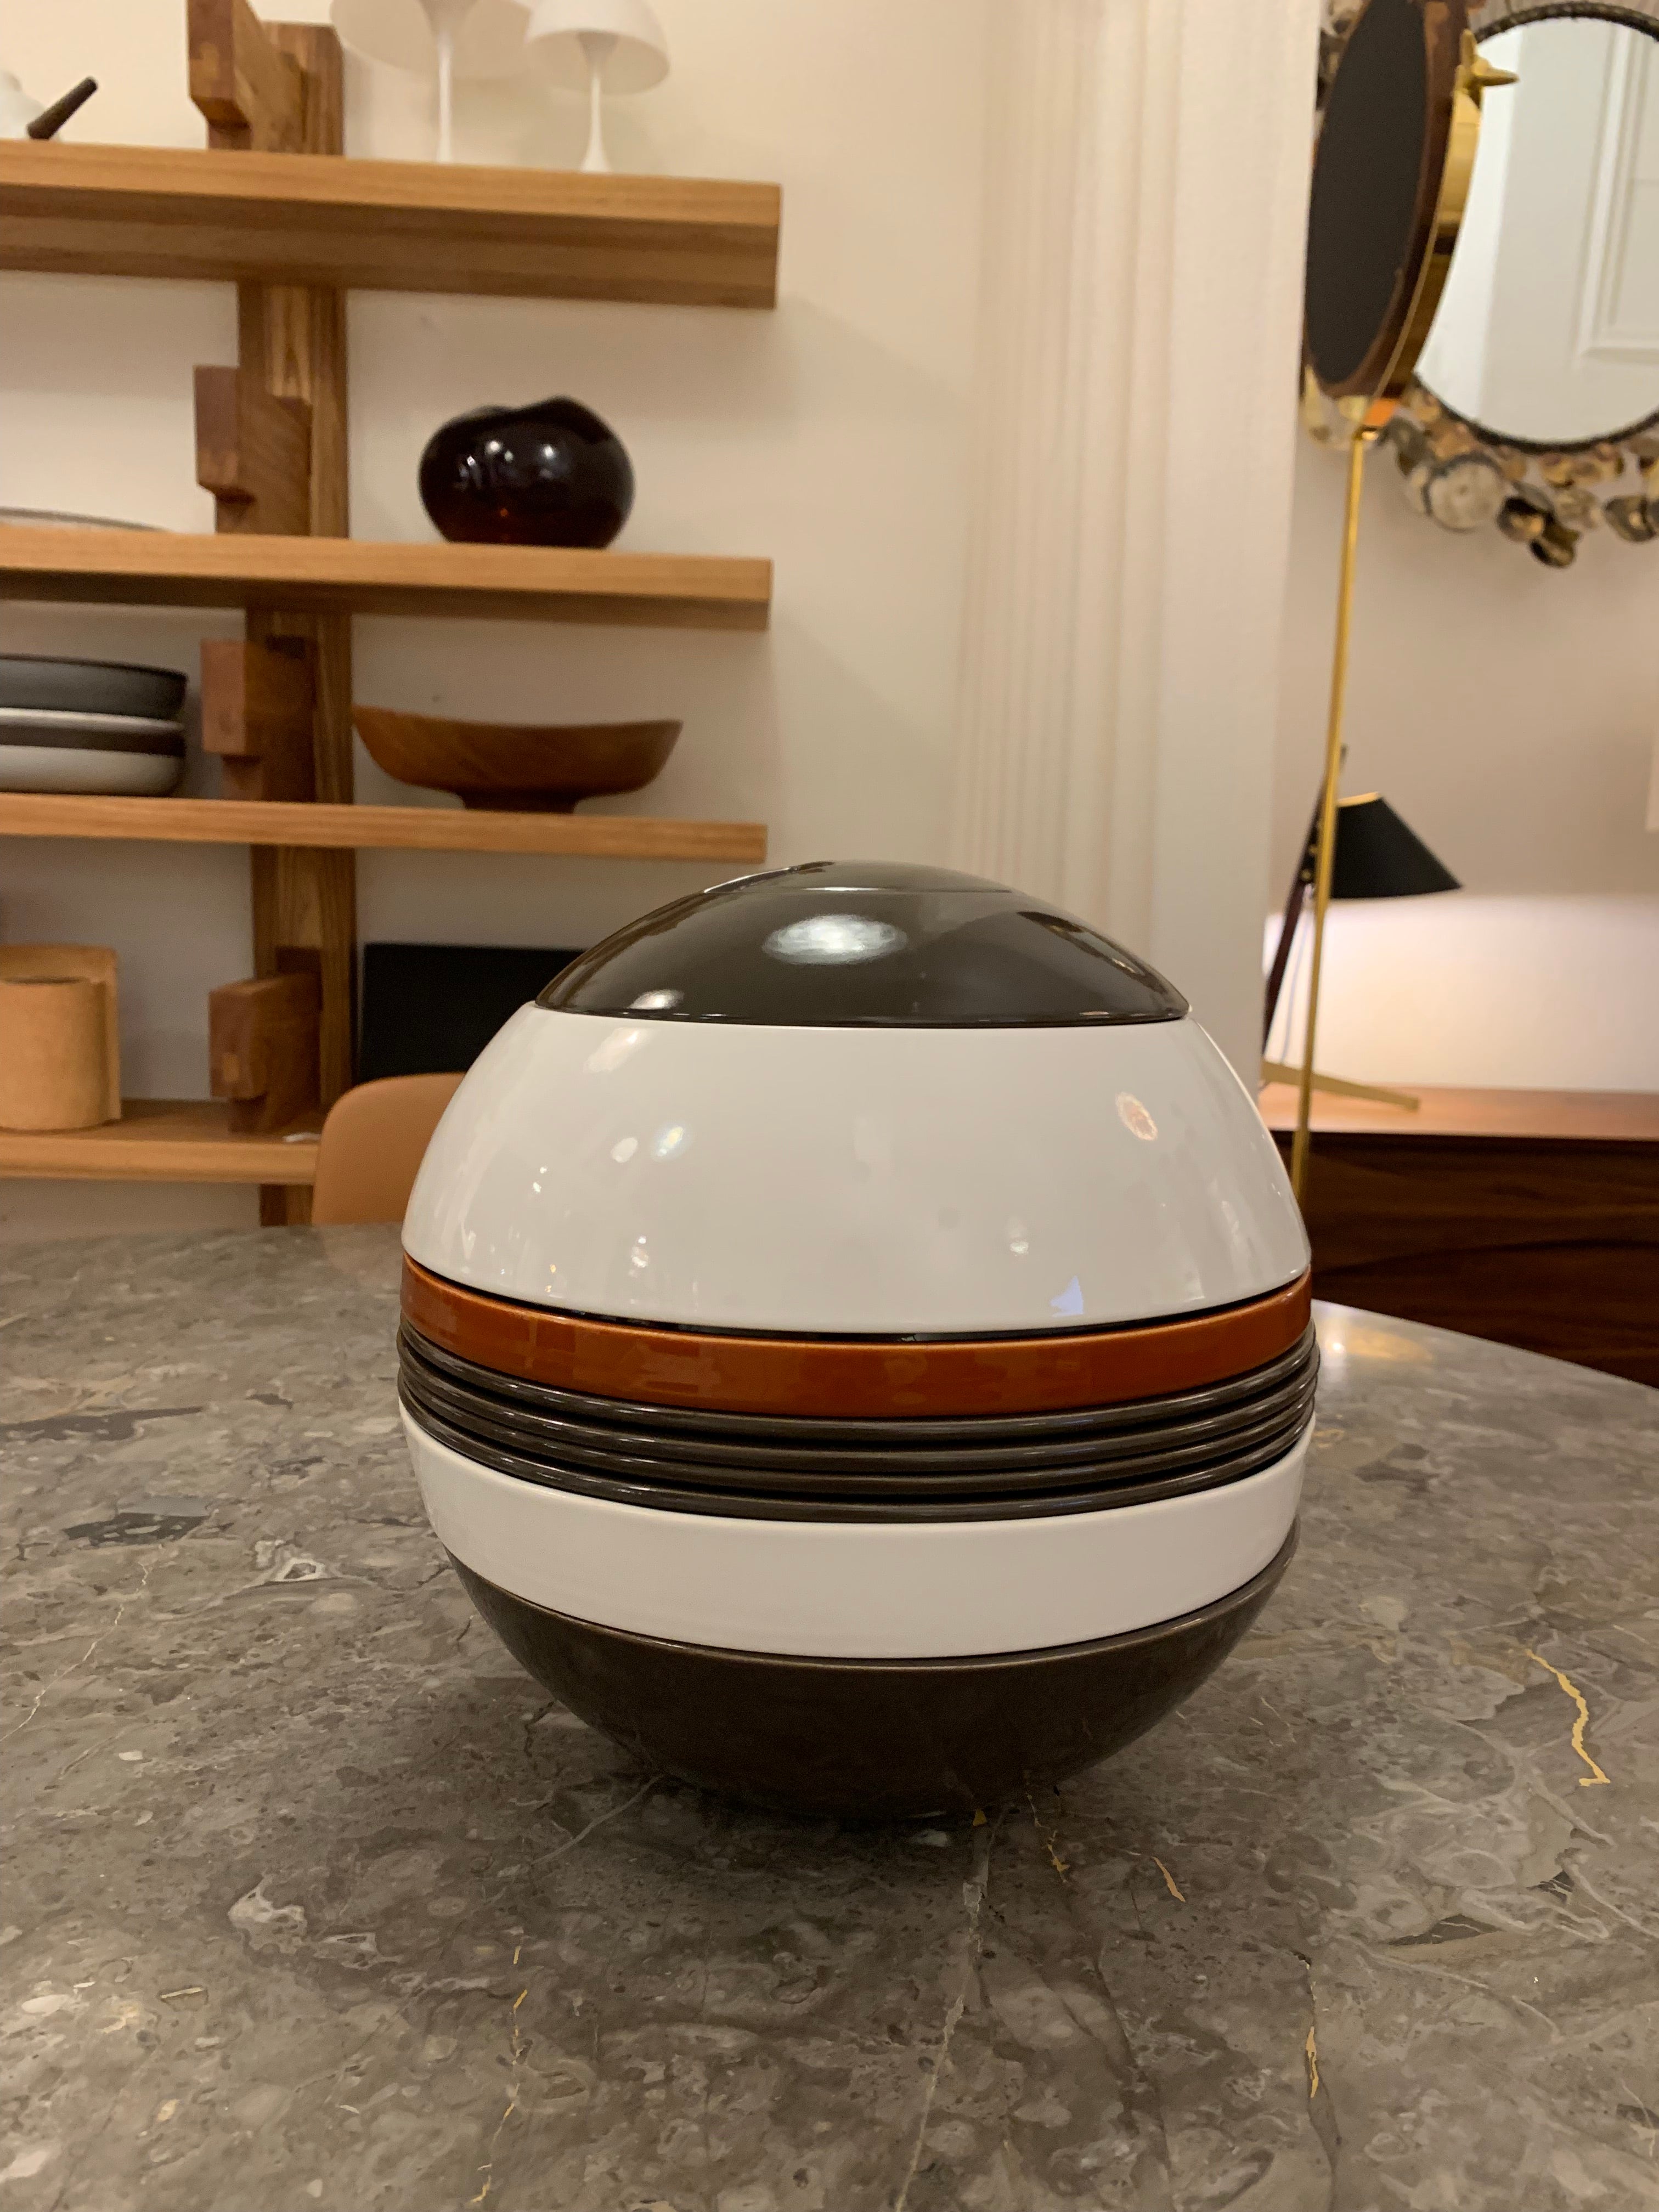 Sphere' (La Boule) was designed in 1969-1970 by Helen von Boch and is has become a collectable icon since.  It was reinvented by Villeroy & Boch in various executions, this is the original from 1970 in exquisite condition.

'La Boule’ Avant Garde is